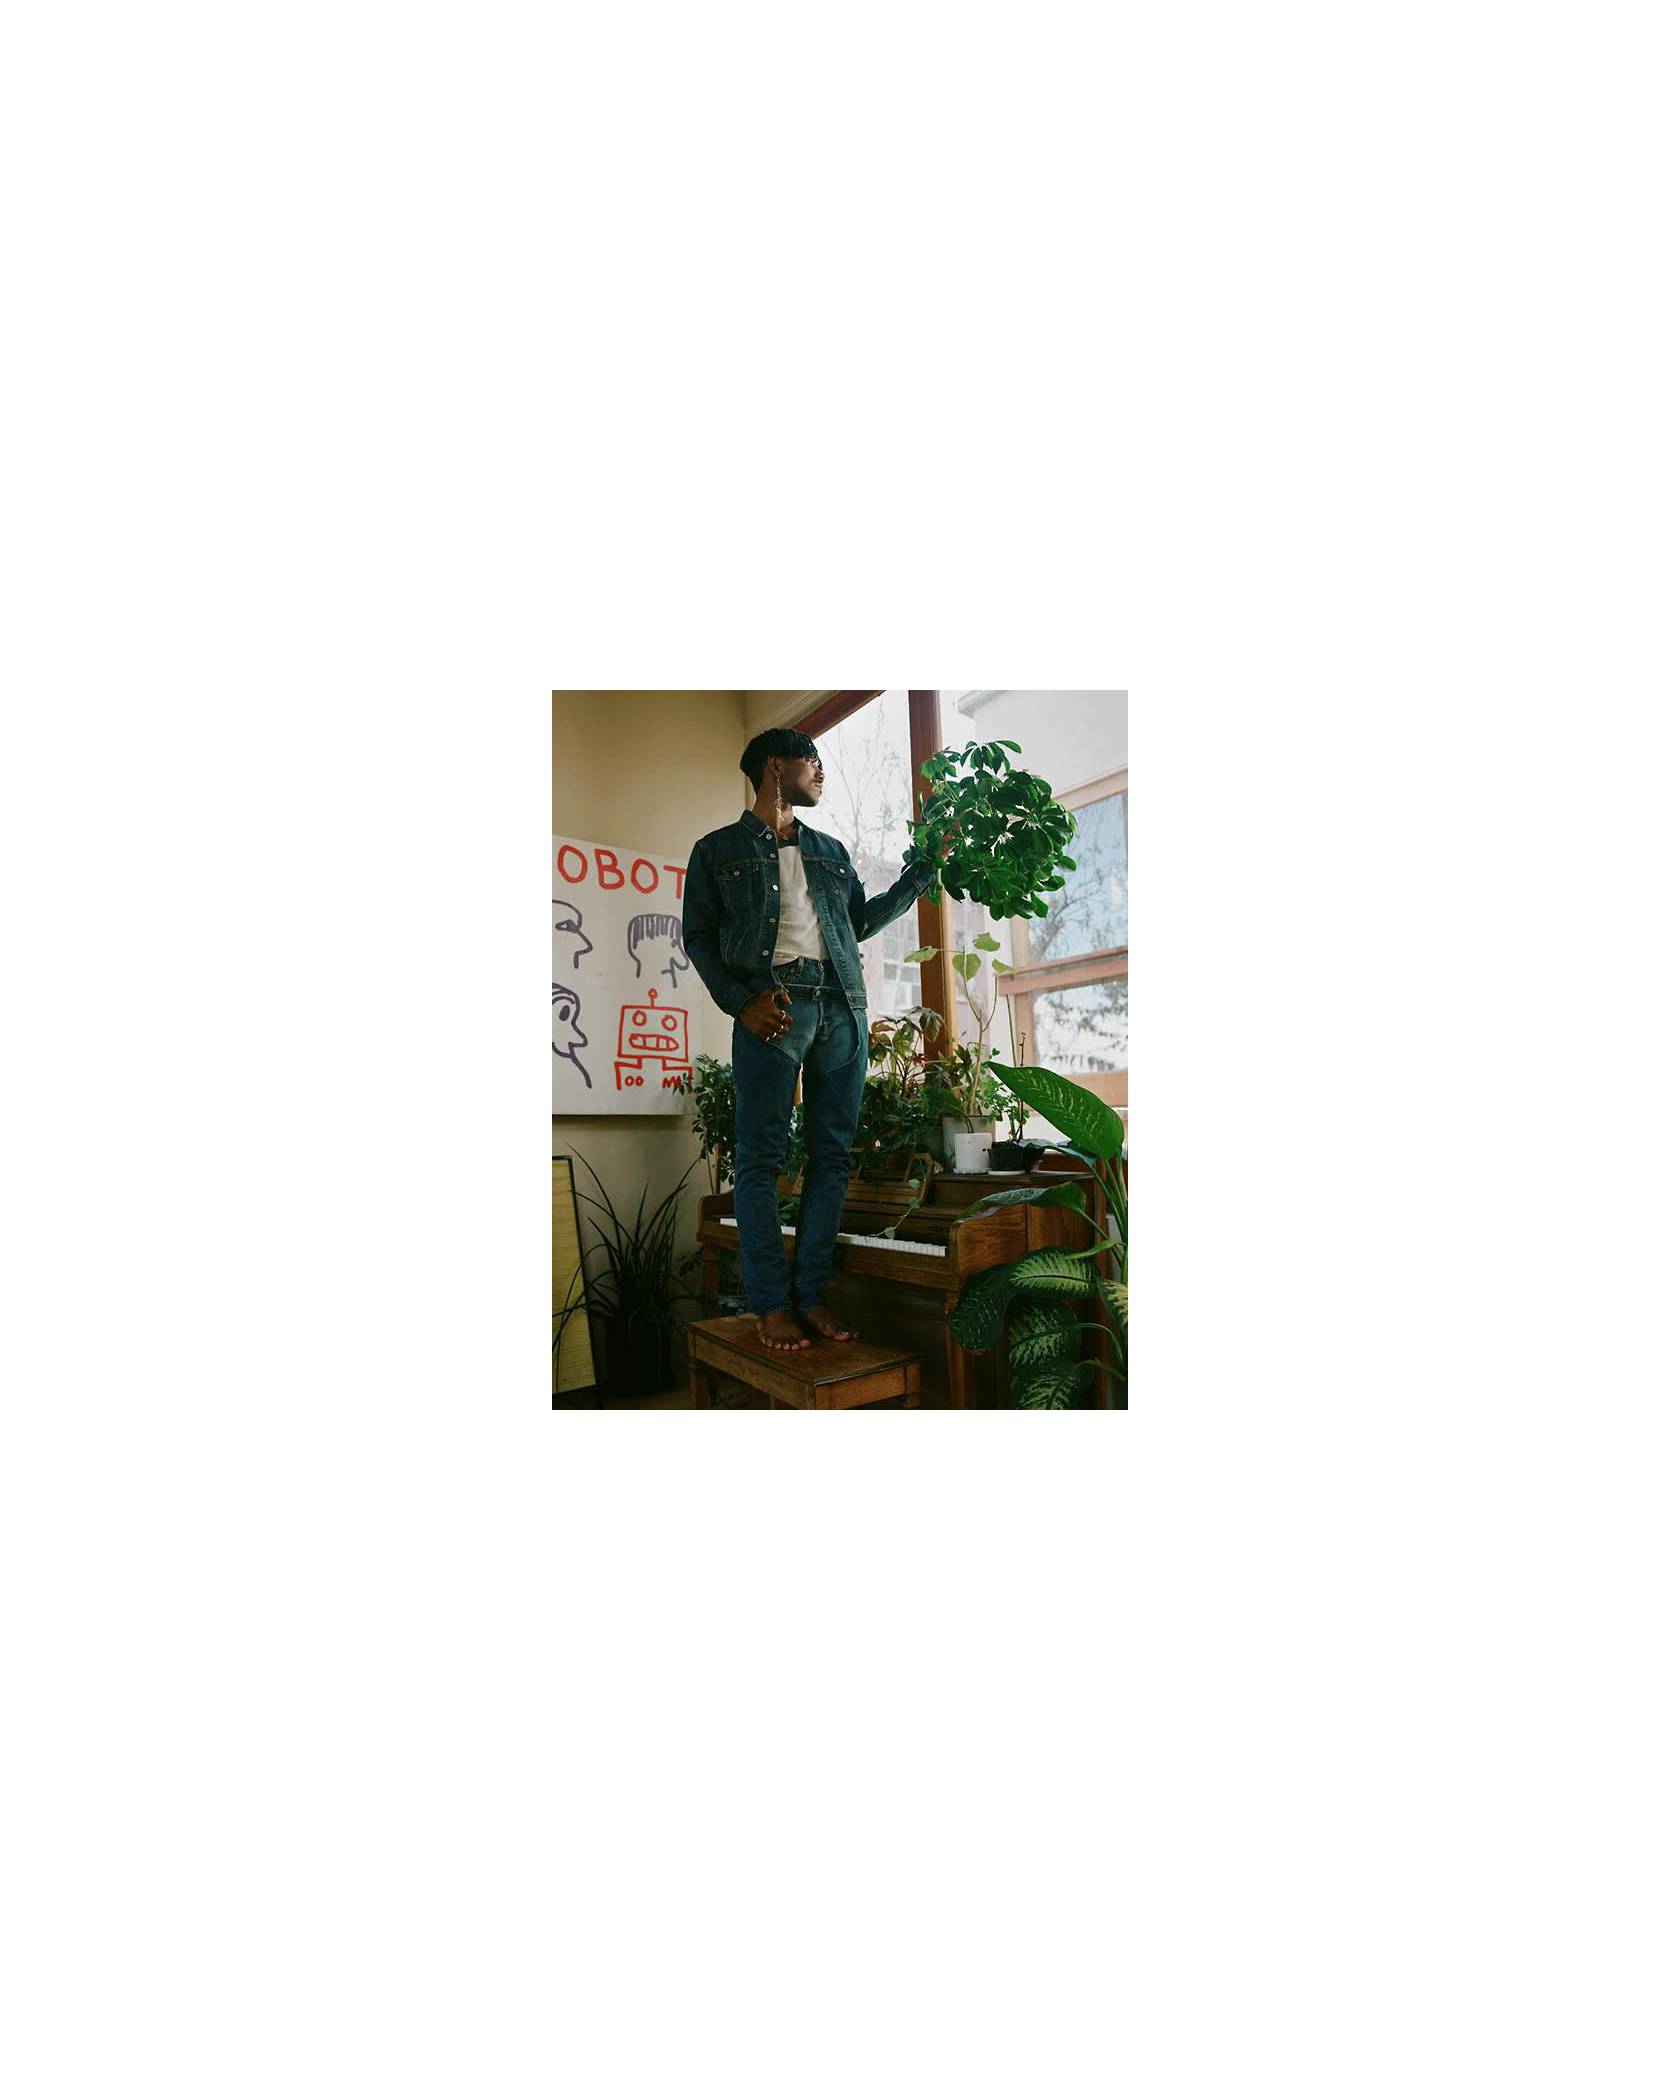 GIFs of Jerrod La Rue in his plant-filled home.